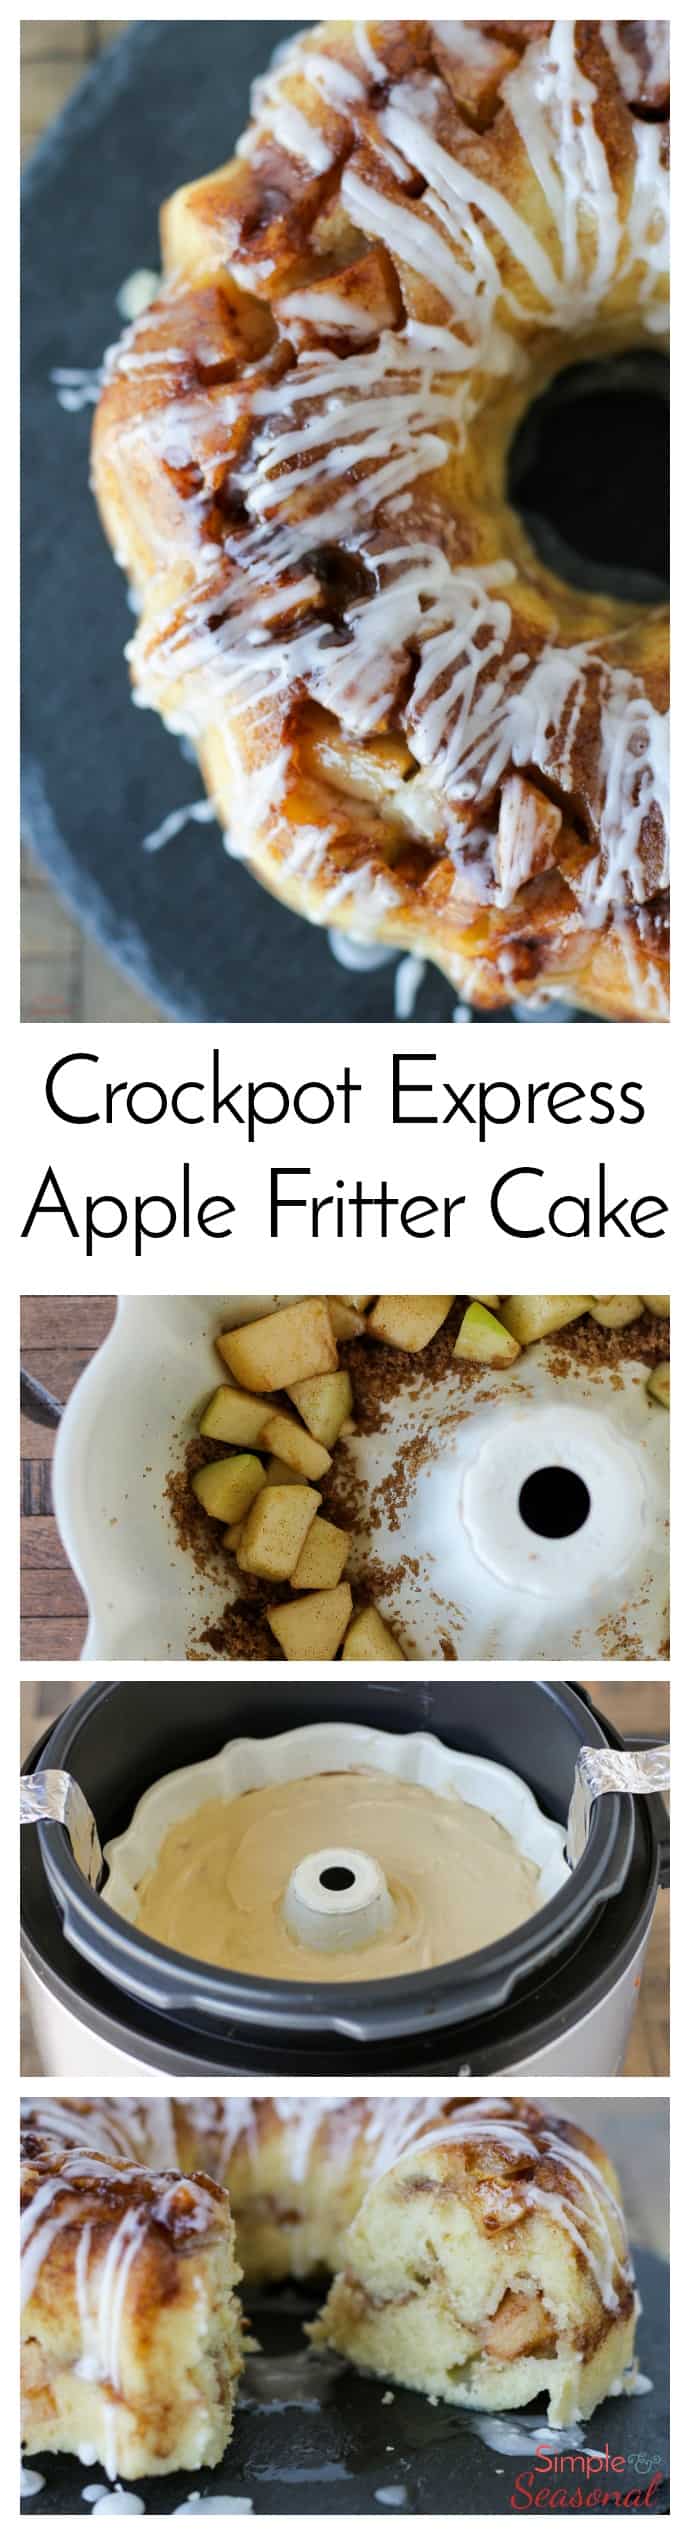 Chunks of tart apples, a sweet glaze and a brown sugar crackle on top make this Crockpot Express Apple Fritter Cake a delicious dessert that's ready in less than an hour (without heating up the kitchen!) #CPE #CrockpotExpress #PressureCooking #Dessert via @nmburk